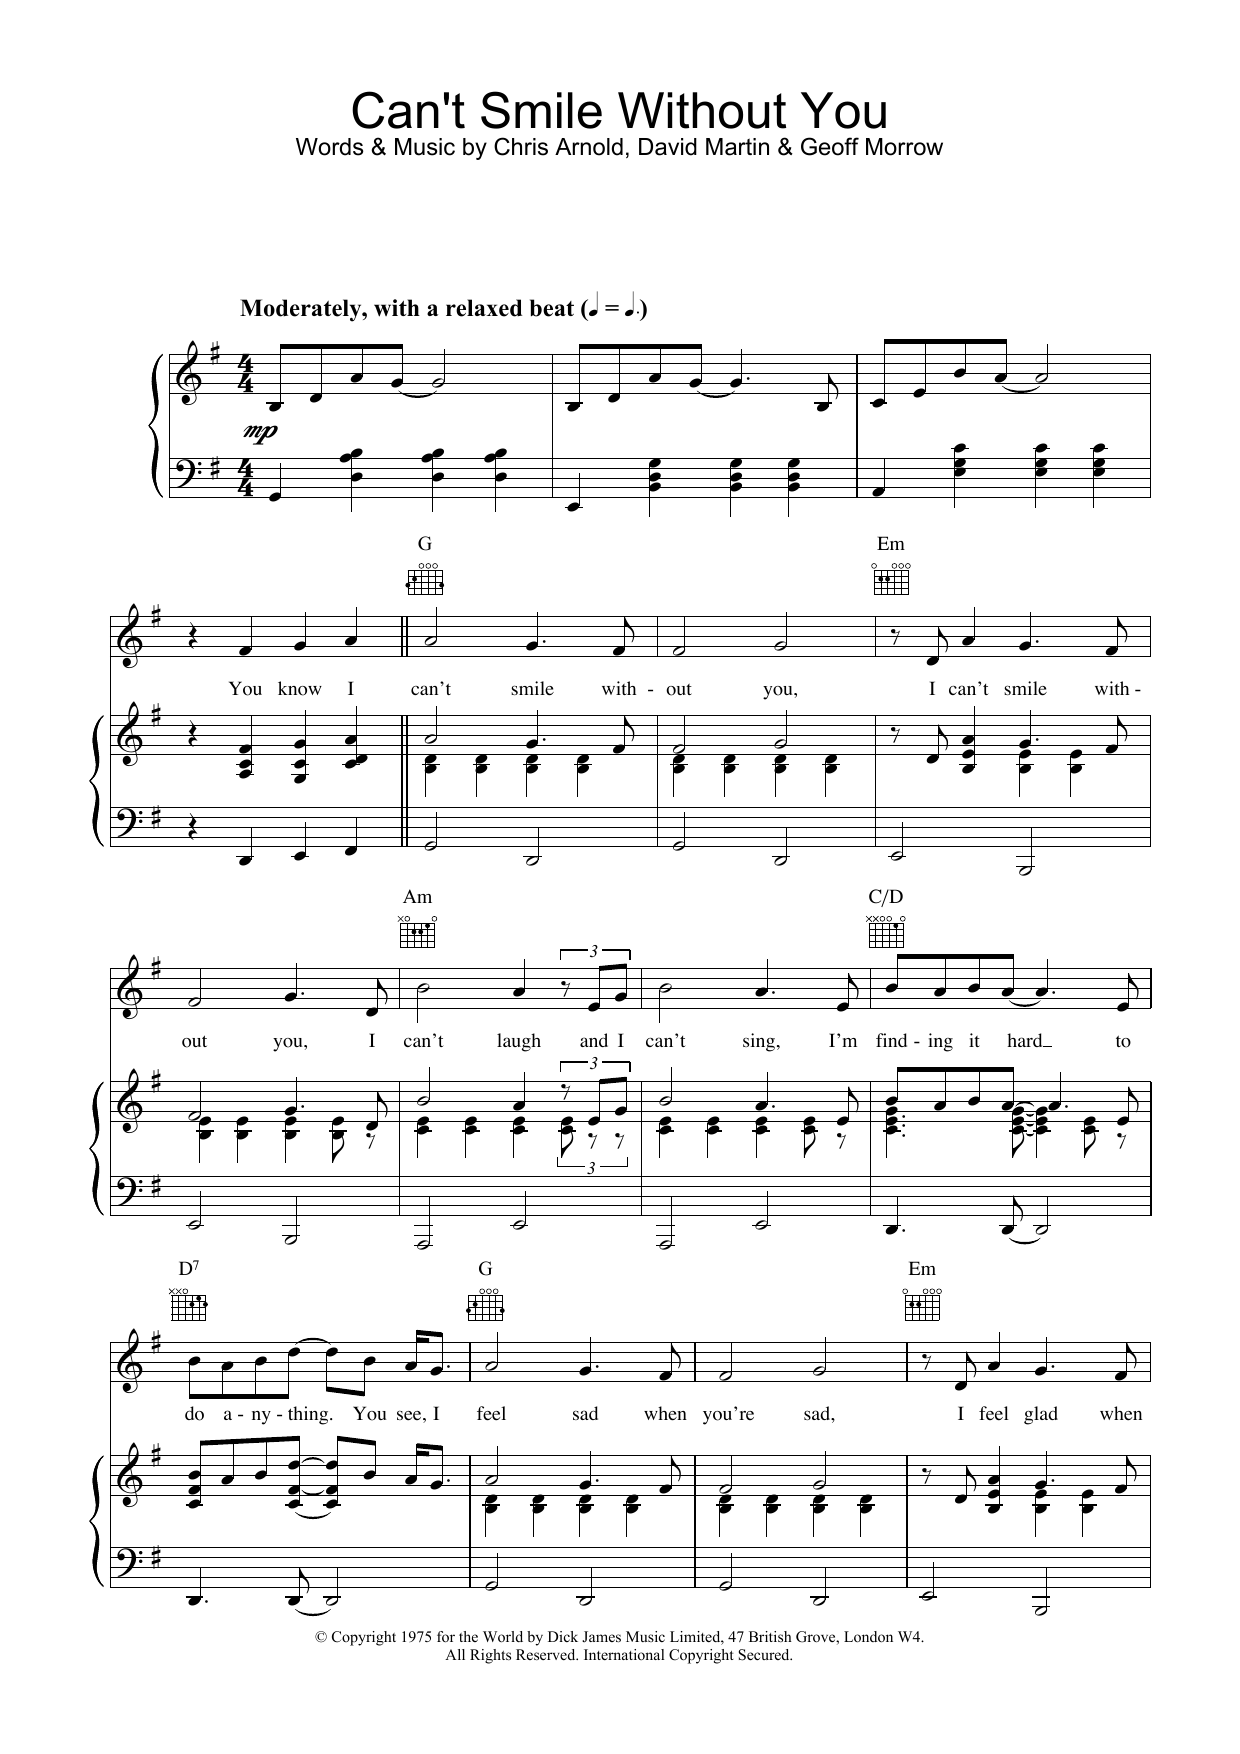 Barry Manilow Can't Smile Without You sheet music notes printable PDF score